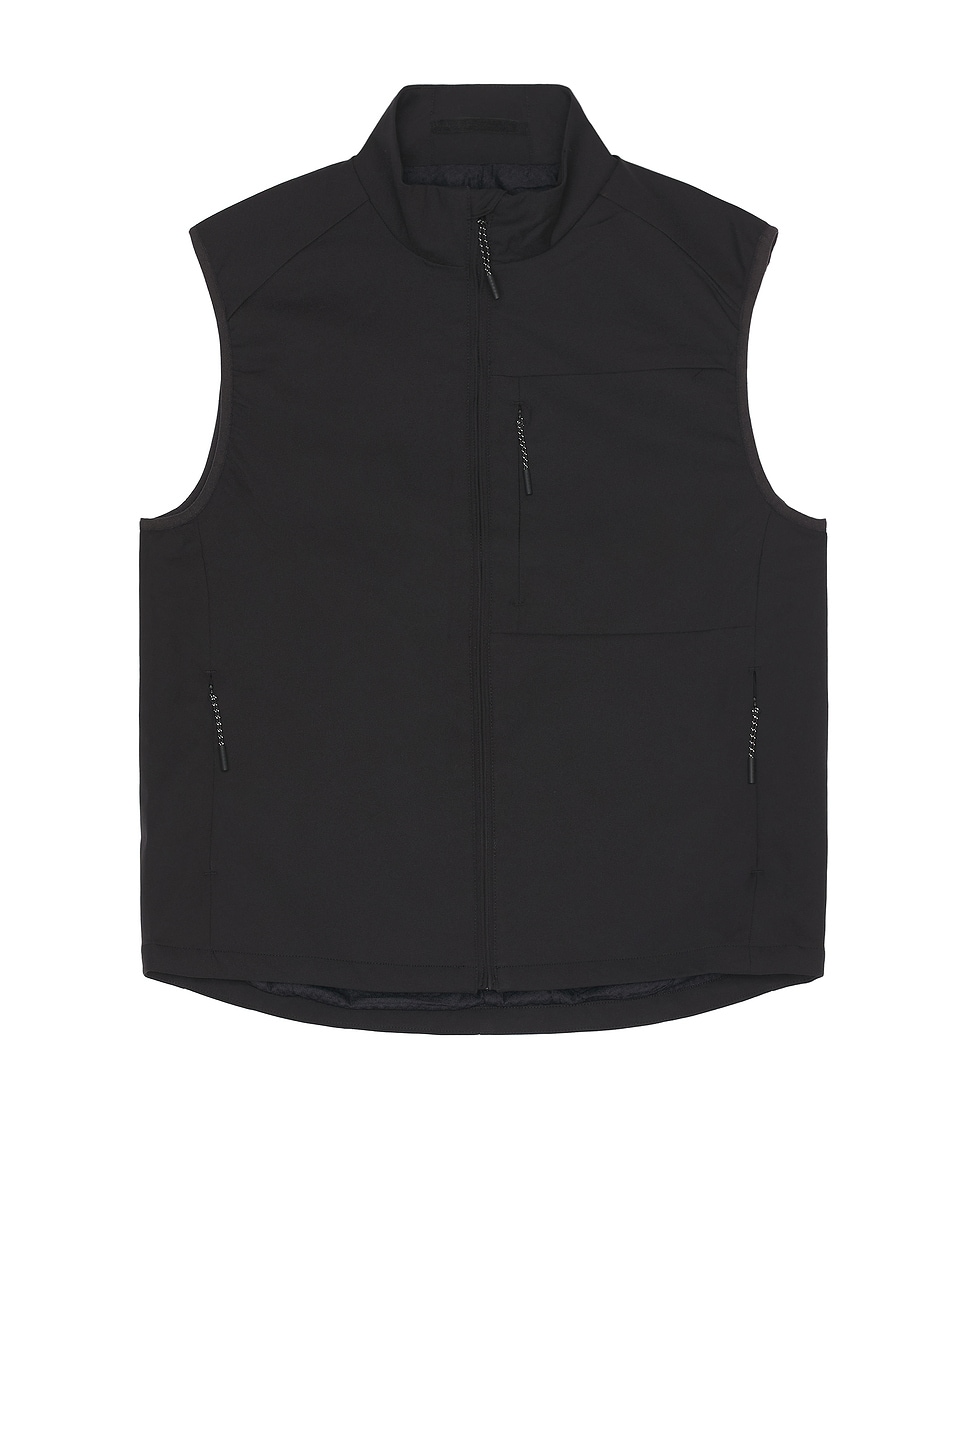 Image 1 of Norse Projects Birkholm Solotex Twill Vest in Black